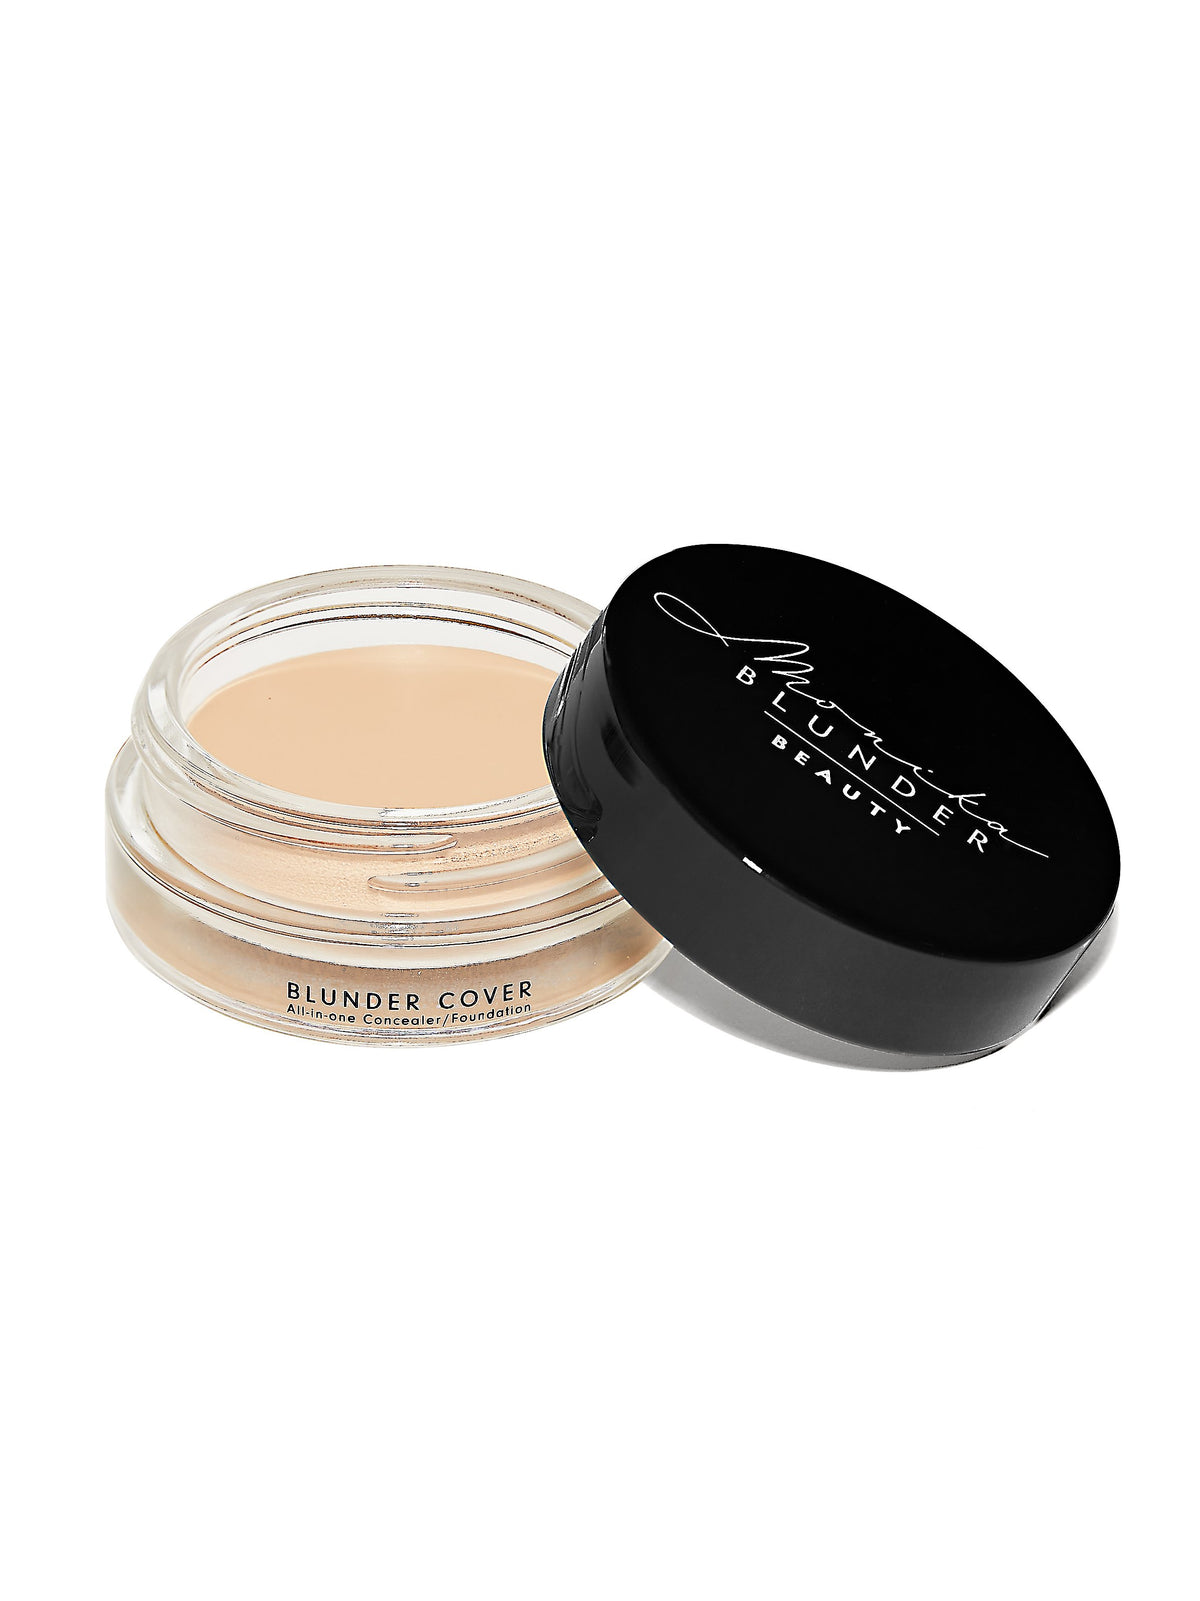 2 ZWEI Blunder Cover All-in-One Concealer/ Foundation